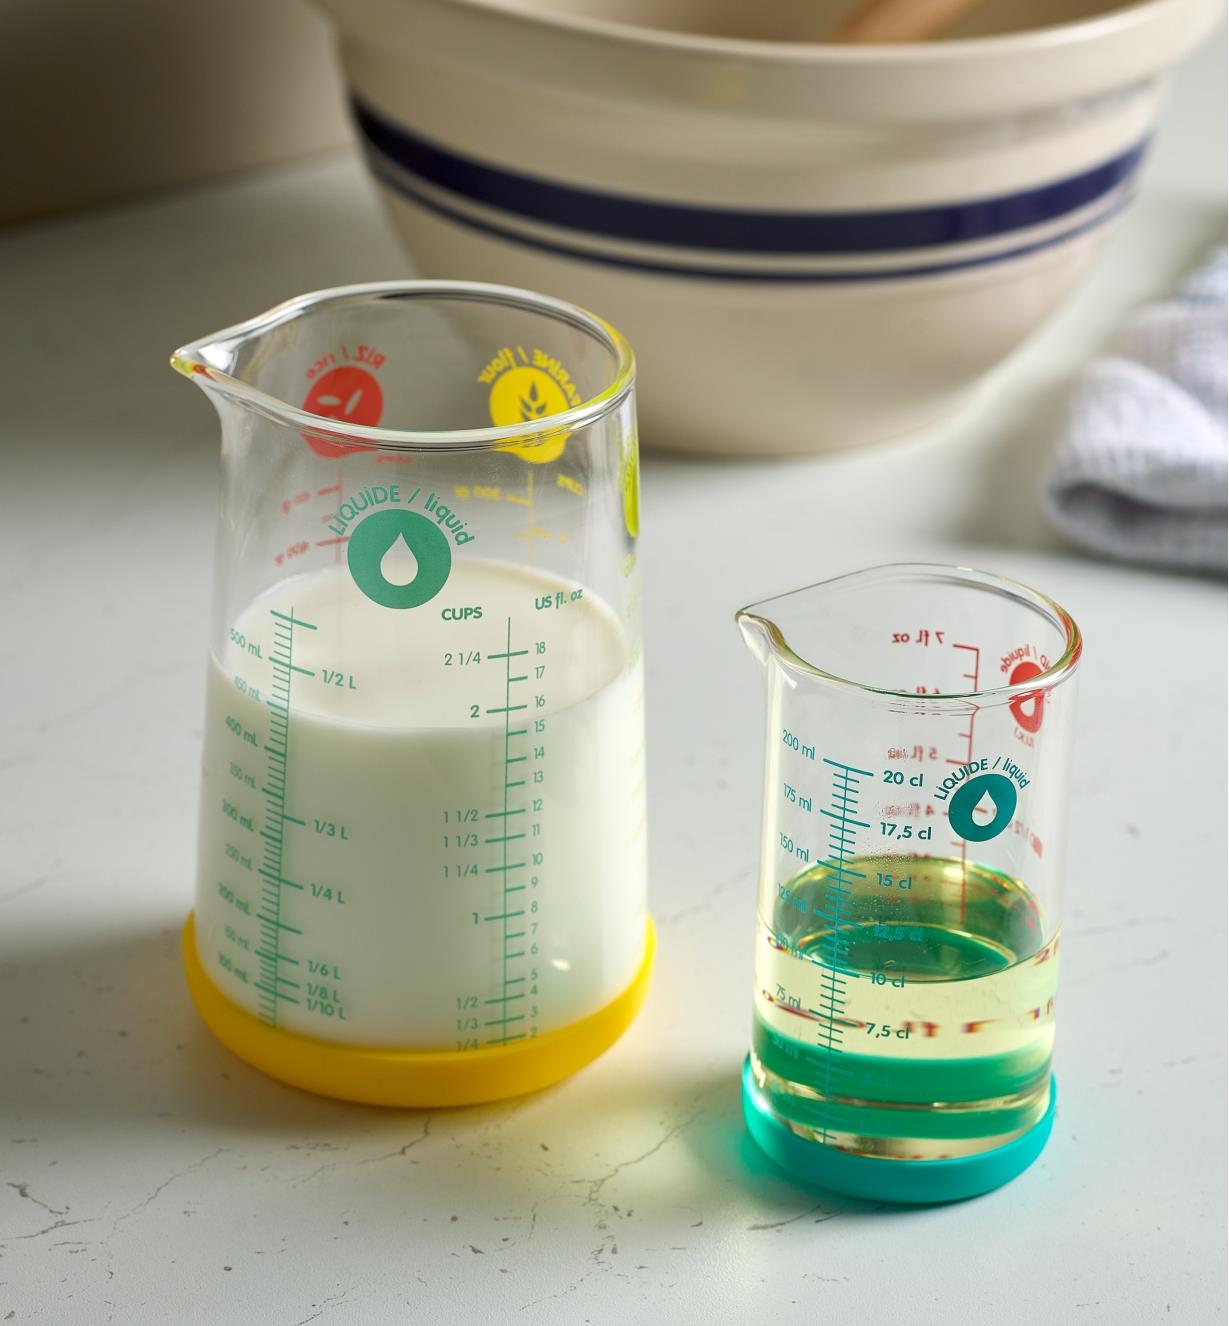 A 500ml measuring glass filled with milk next to a 200ml measuring glass filled with clear liquid